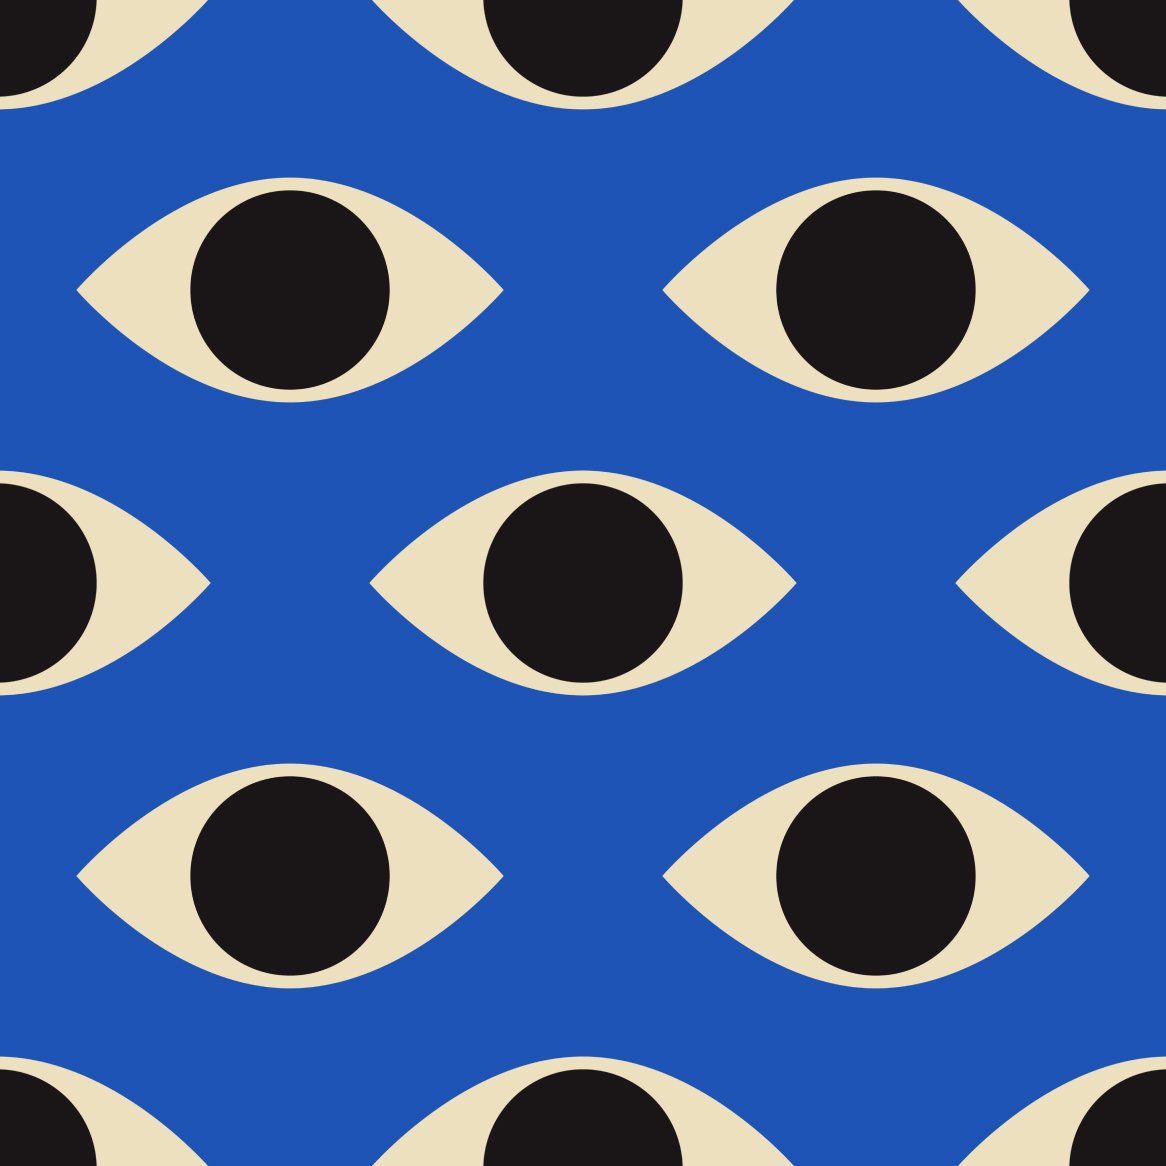 Artwork showing a compilation of eyes on a blue background